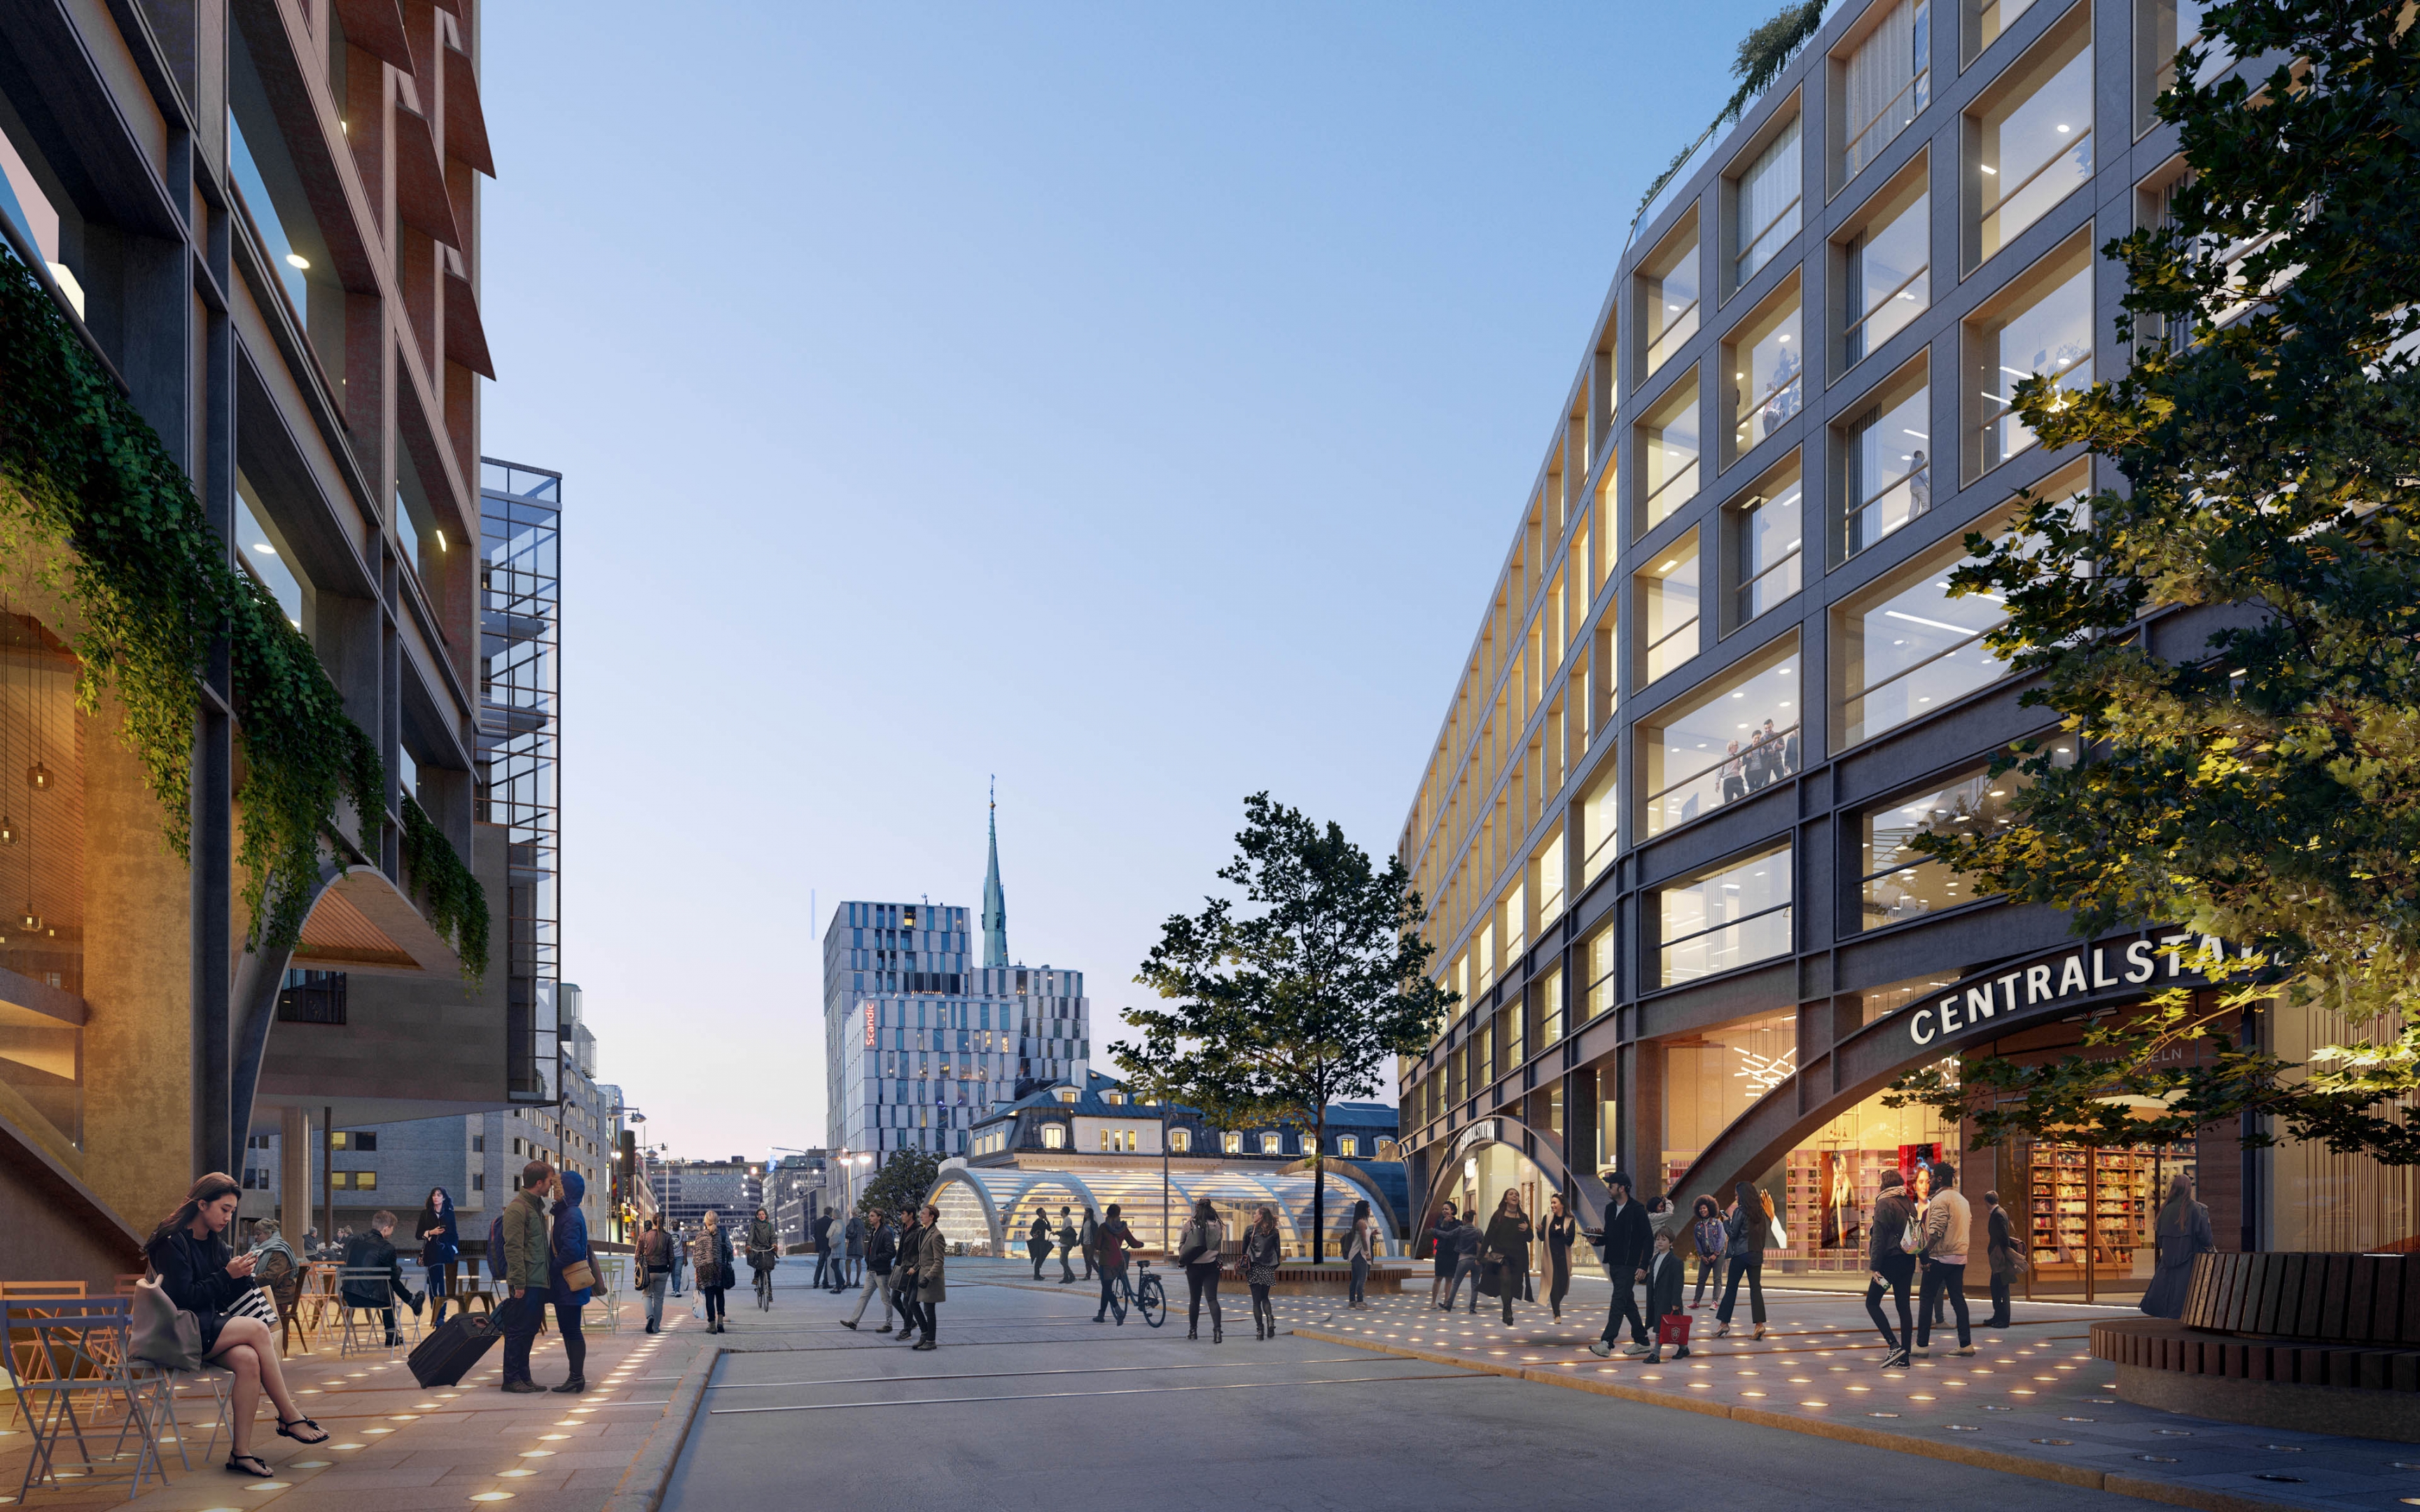 Architectural visualization of Centralstation for Foster & Partner, an civic area during blue hour light from a street view.